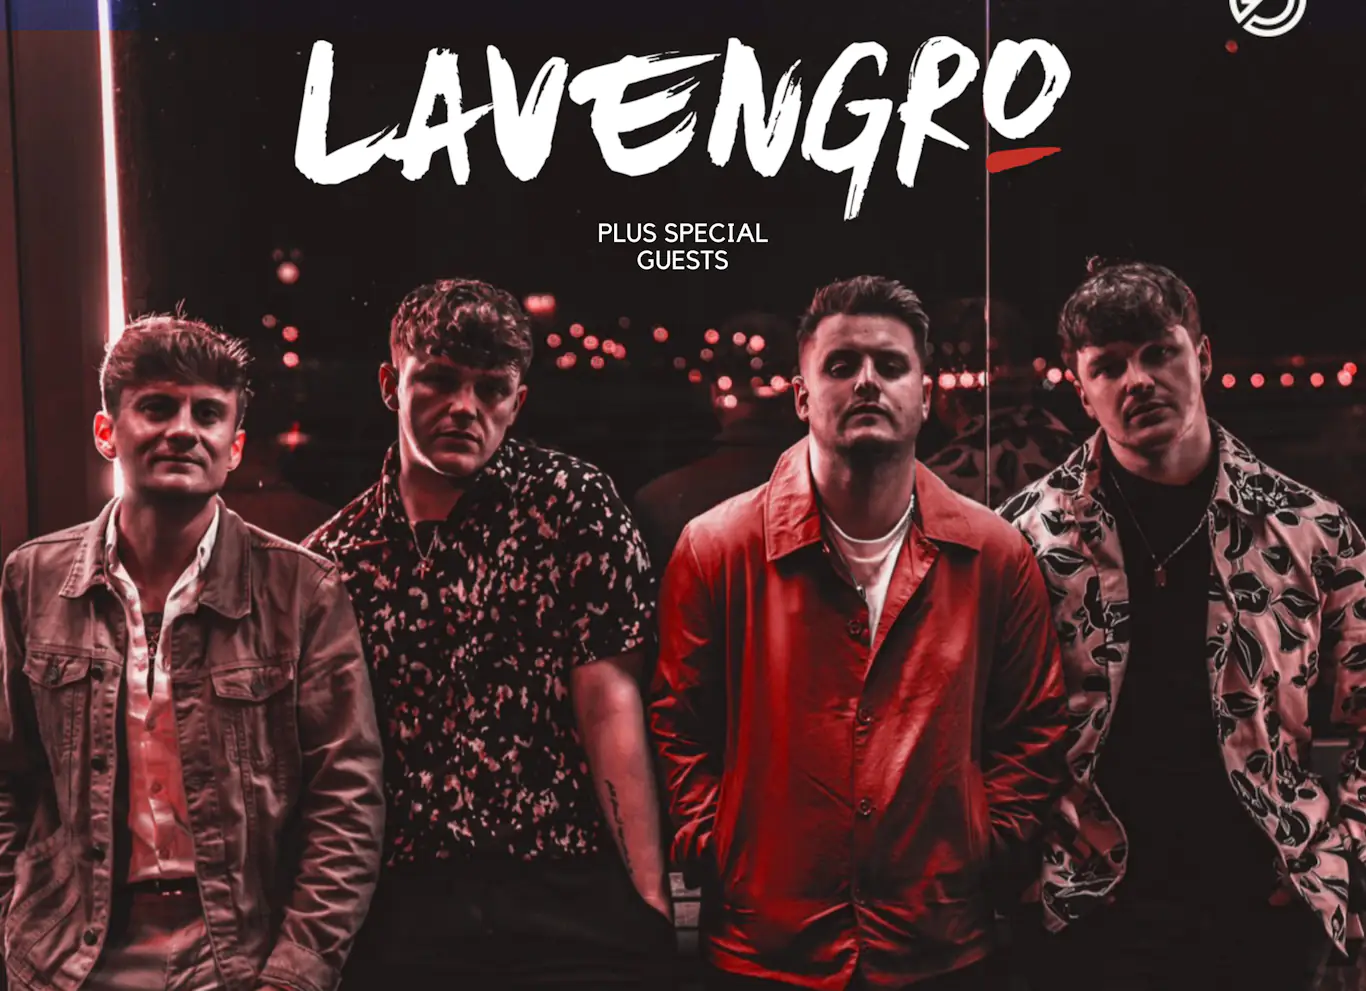 Synth-pop band LAVENGRO play headline show tonight at Ulster Sports Club